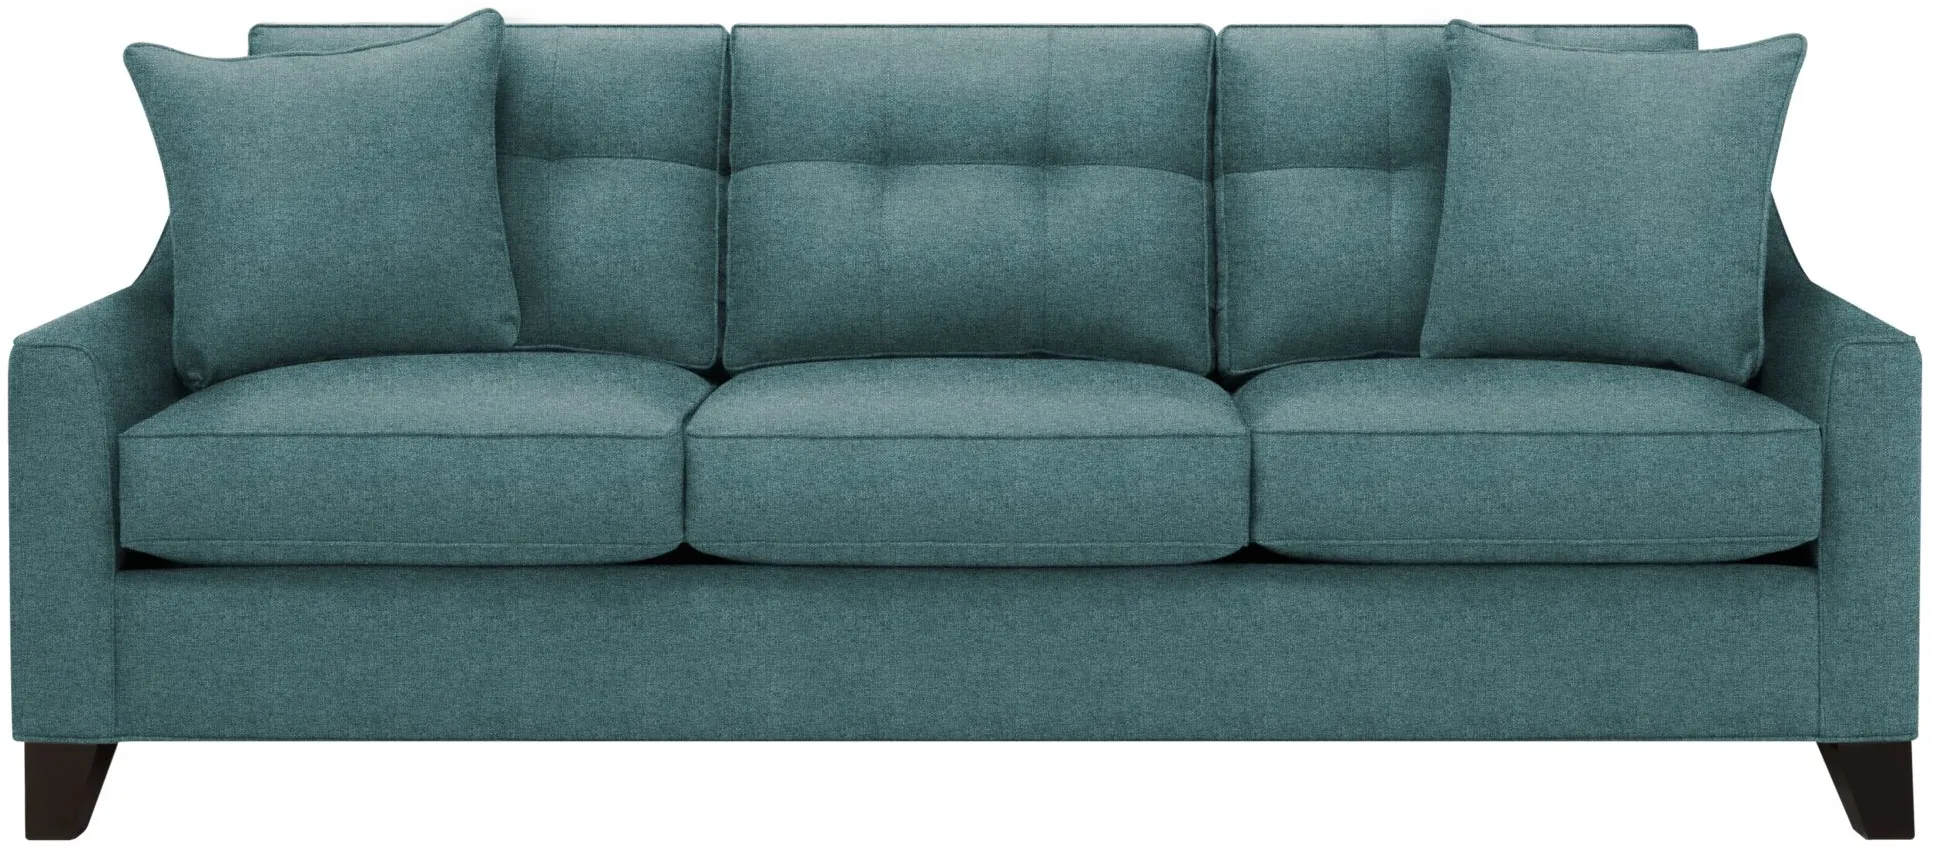 Carmine Queen Sleeper Sofa in Santa Rosa Turquoise by H.M. Richards